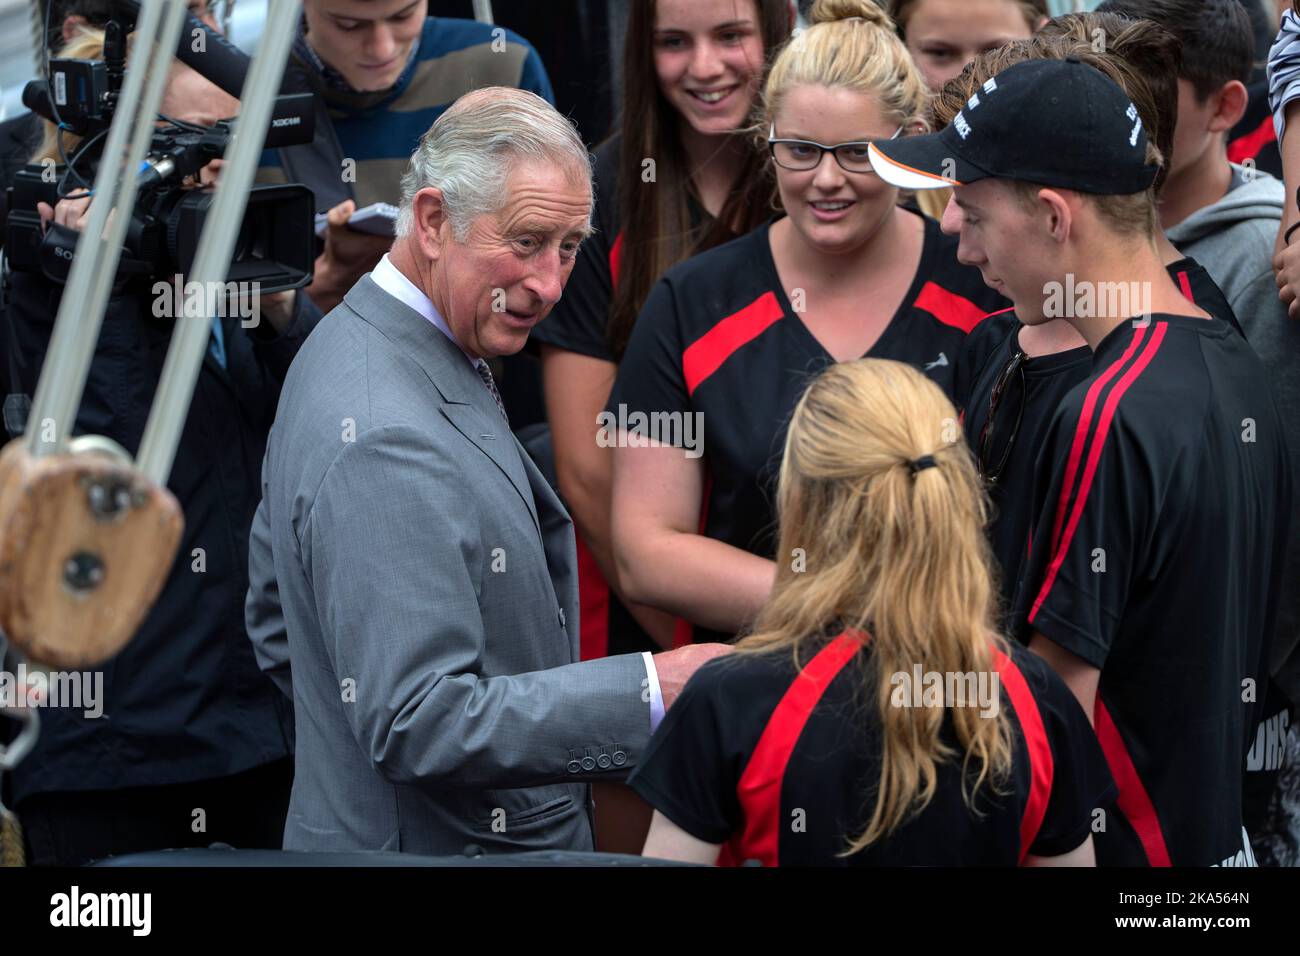 The Prince of Wales visits the New Zealand Youth Training Vessel, Spirit of New Zealand, Princes Wharf, New Zealand, on  Tuesday, November 10, 2015. Stock Photo